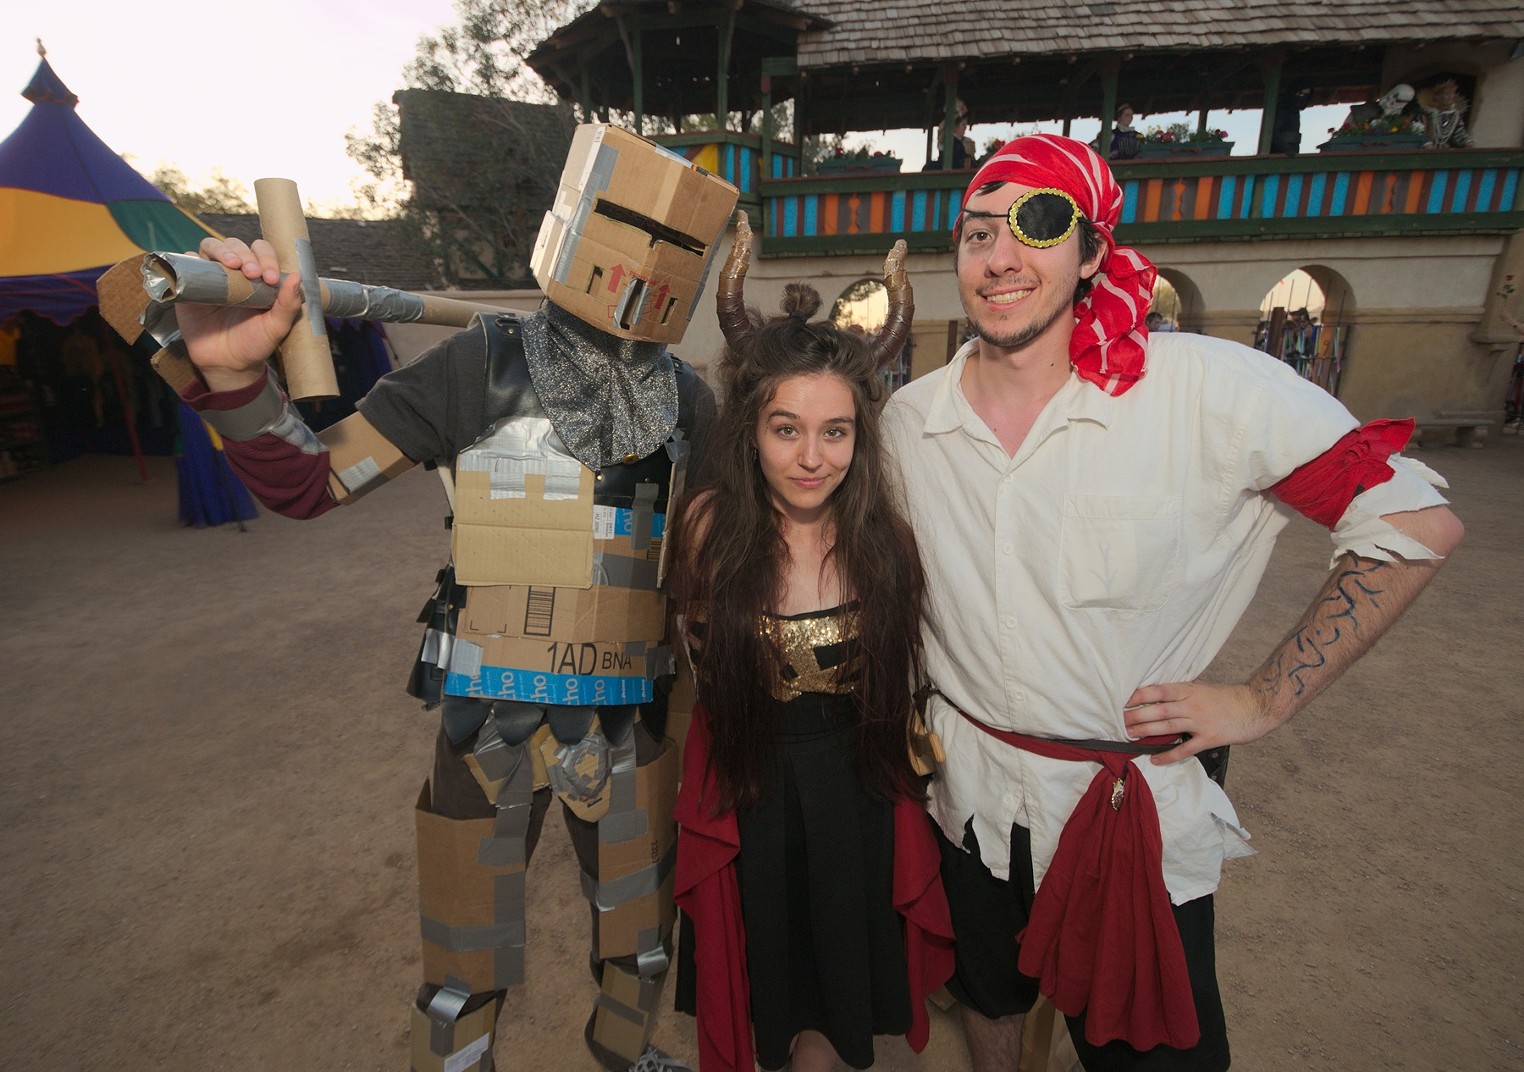 A Day of Medieval Merriment at the Arizona Renaissance Festival